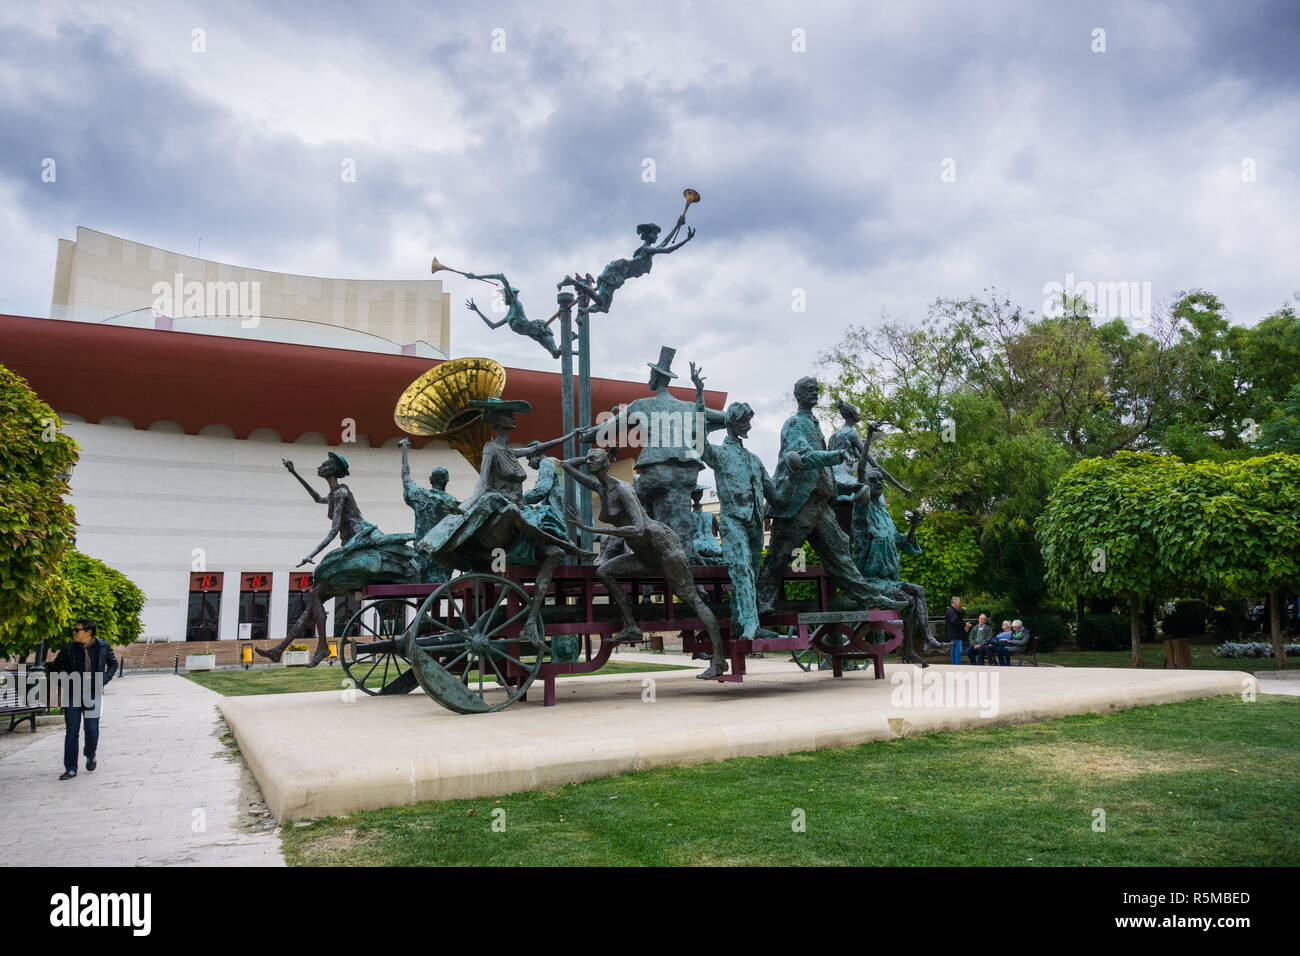 September 22, 2017 Bucharest/Romania - 'A Carriage with Clowns' (Caruta cu Paiate) sculpture by Ioan Bolborea in front of the Ion Luca Caragiale Natio Stock Photo